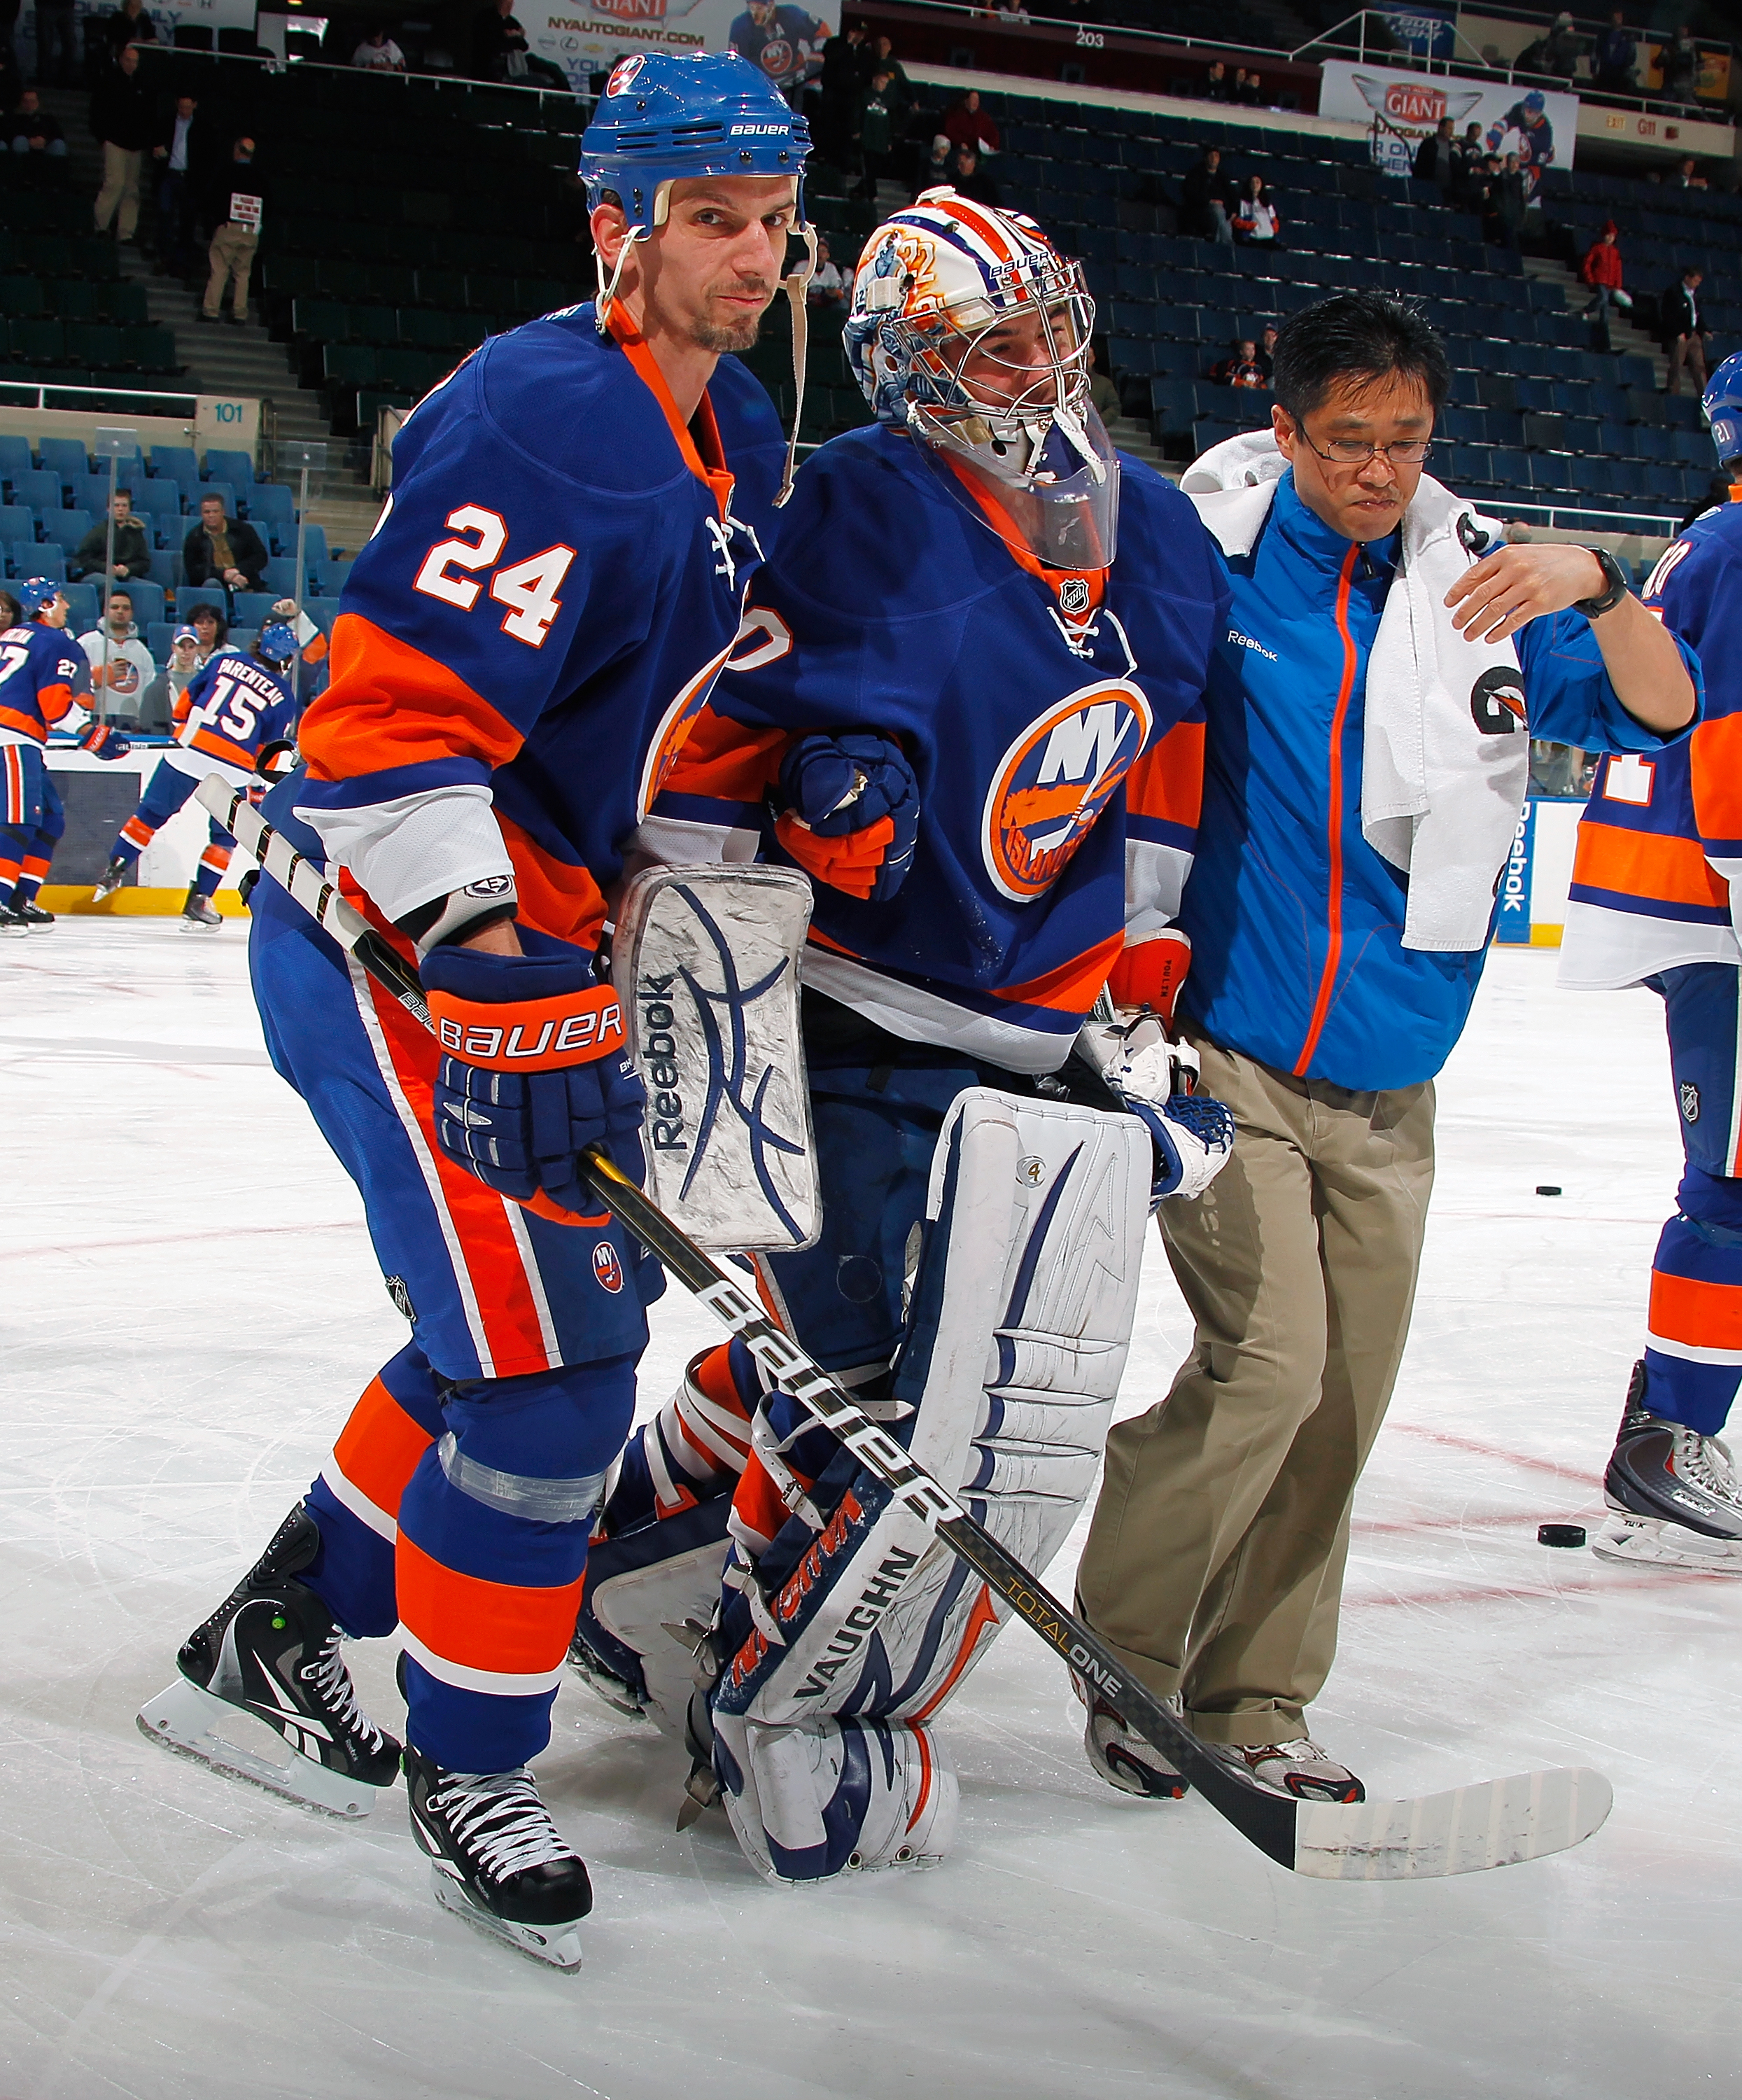 UNIONDALE, NY - FEBRUARY 08:  Kevin Poulin #60 of the New York Islanders is helped off the ice by Radek Martinek #24 and Assistant Athletic Trainer Nates Goto after being injured during warmups on February 8, 2011 at Nassau Colsium in Uniondale, New York.